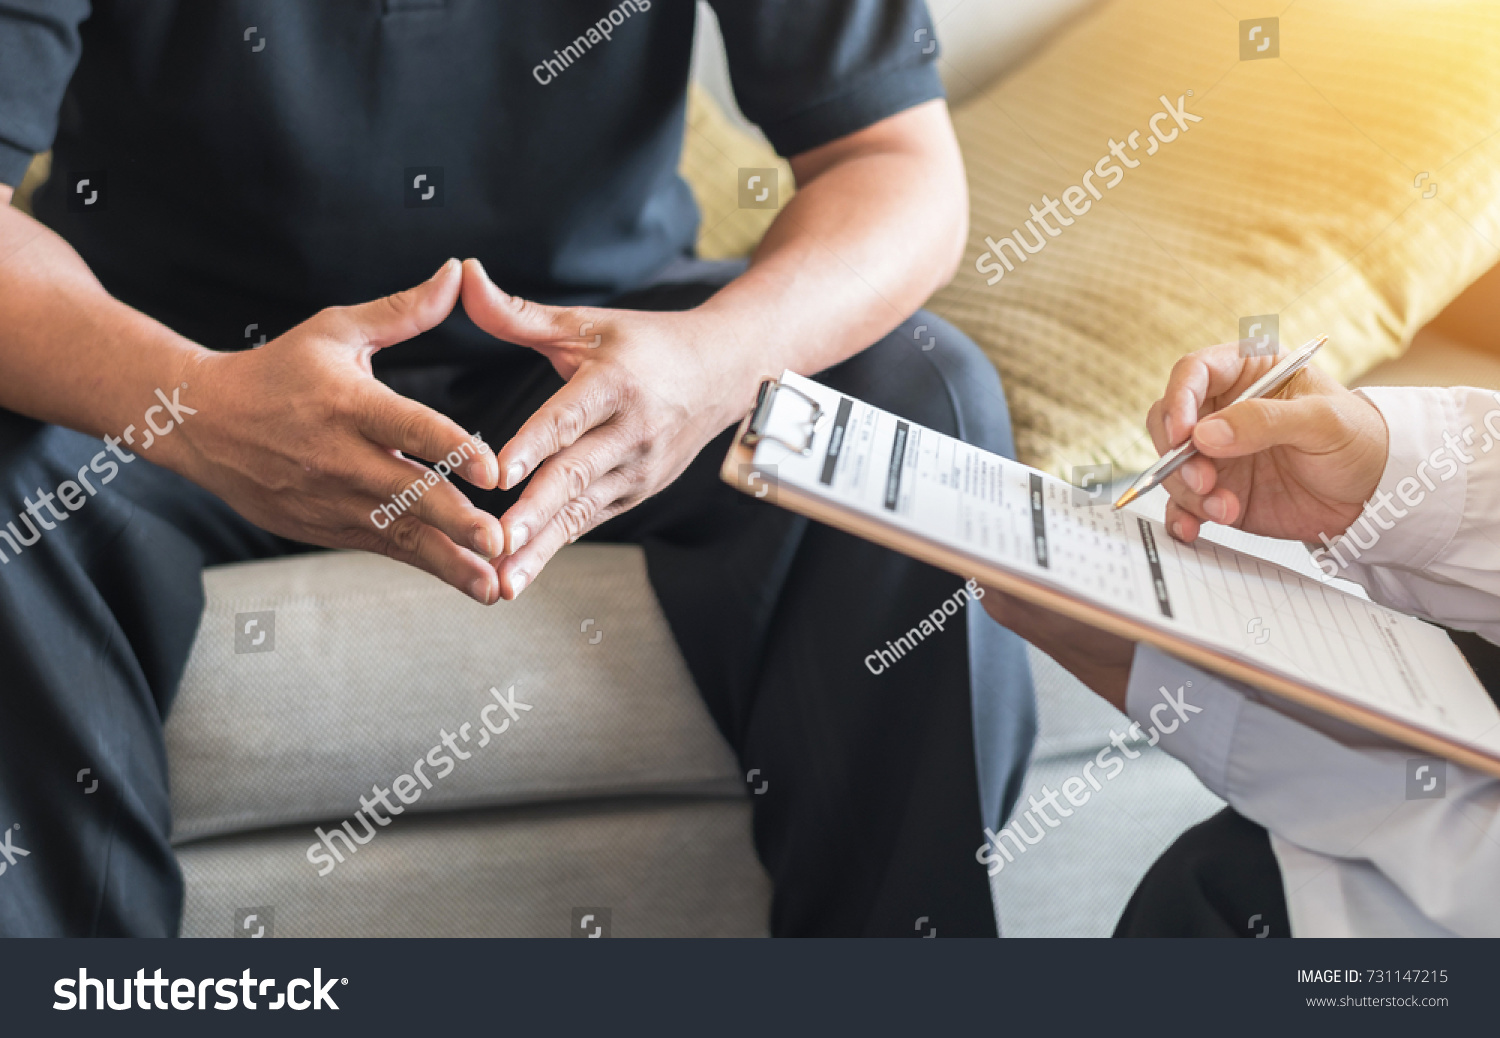 Male patient having consultation with doctor or psychiatrist who working on diagnostic examination on men's health disease or mental illness in medical clinic or hospital mental health service center